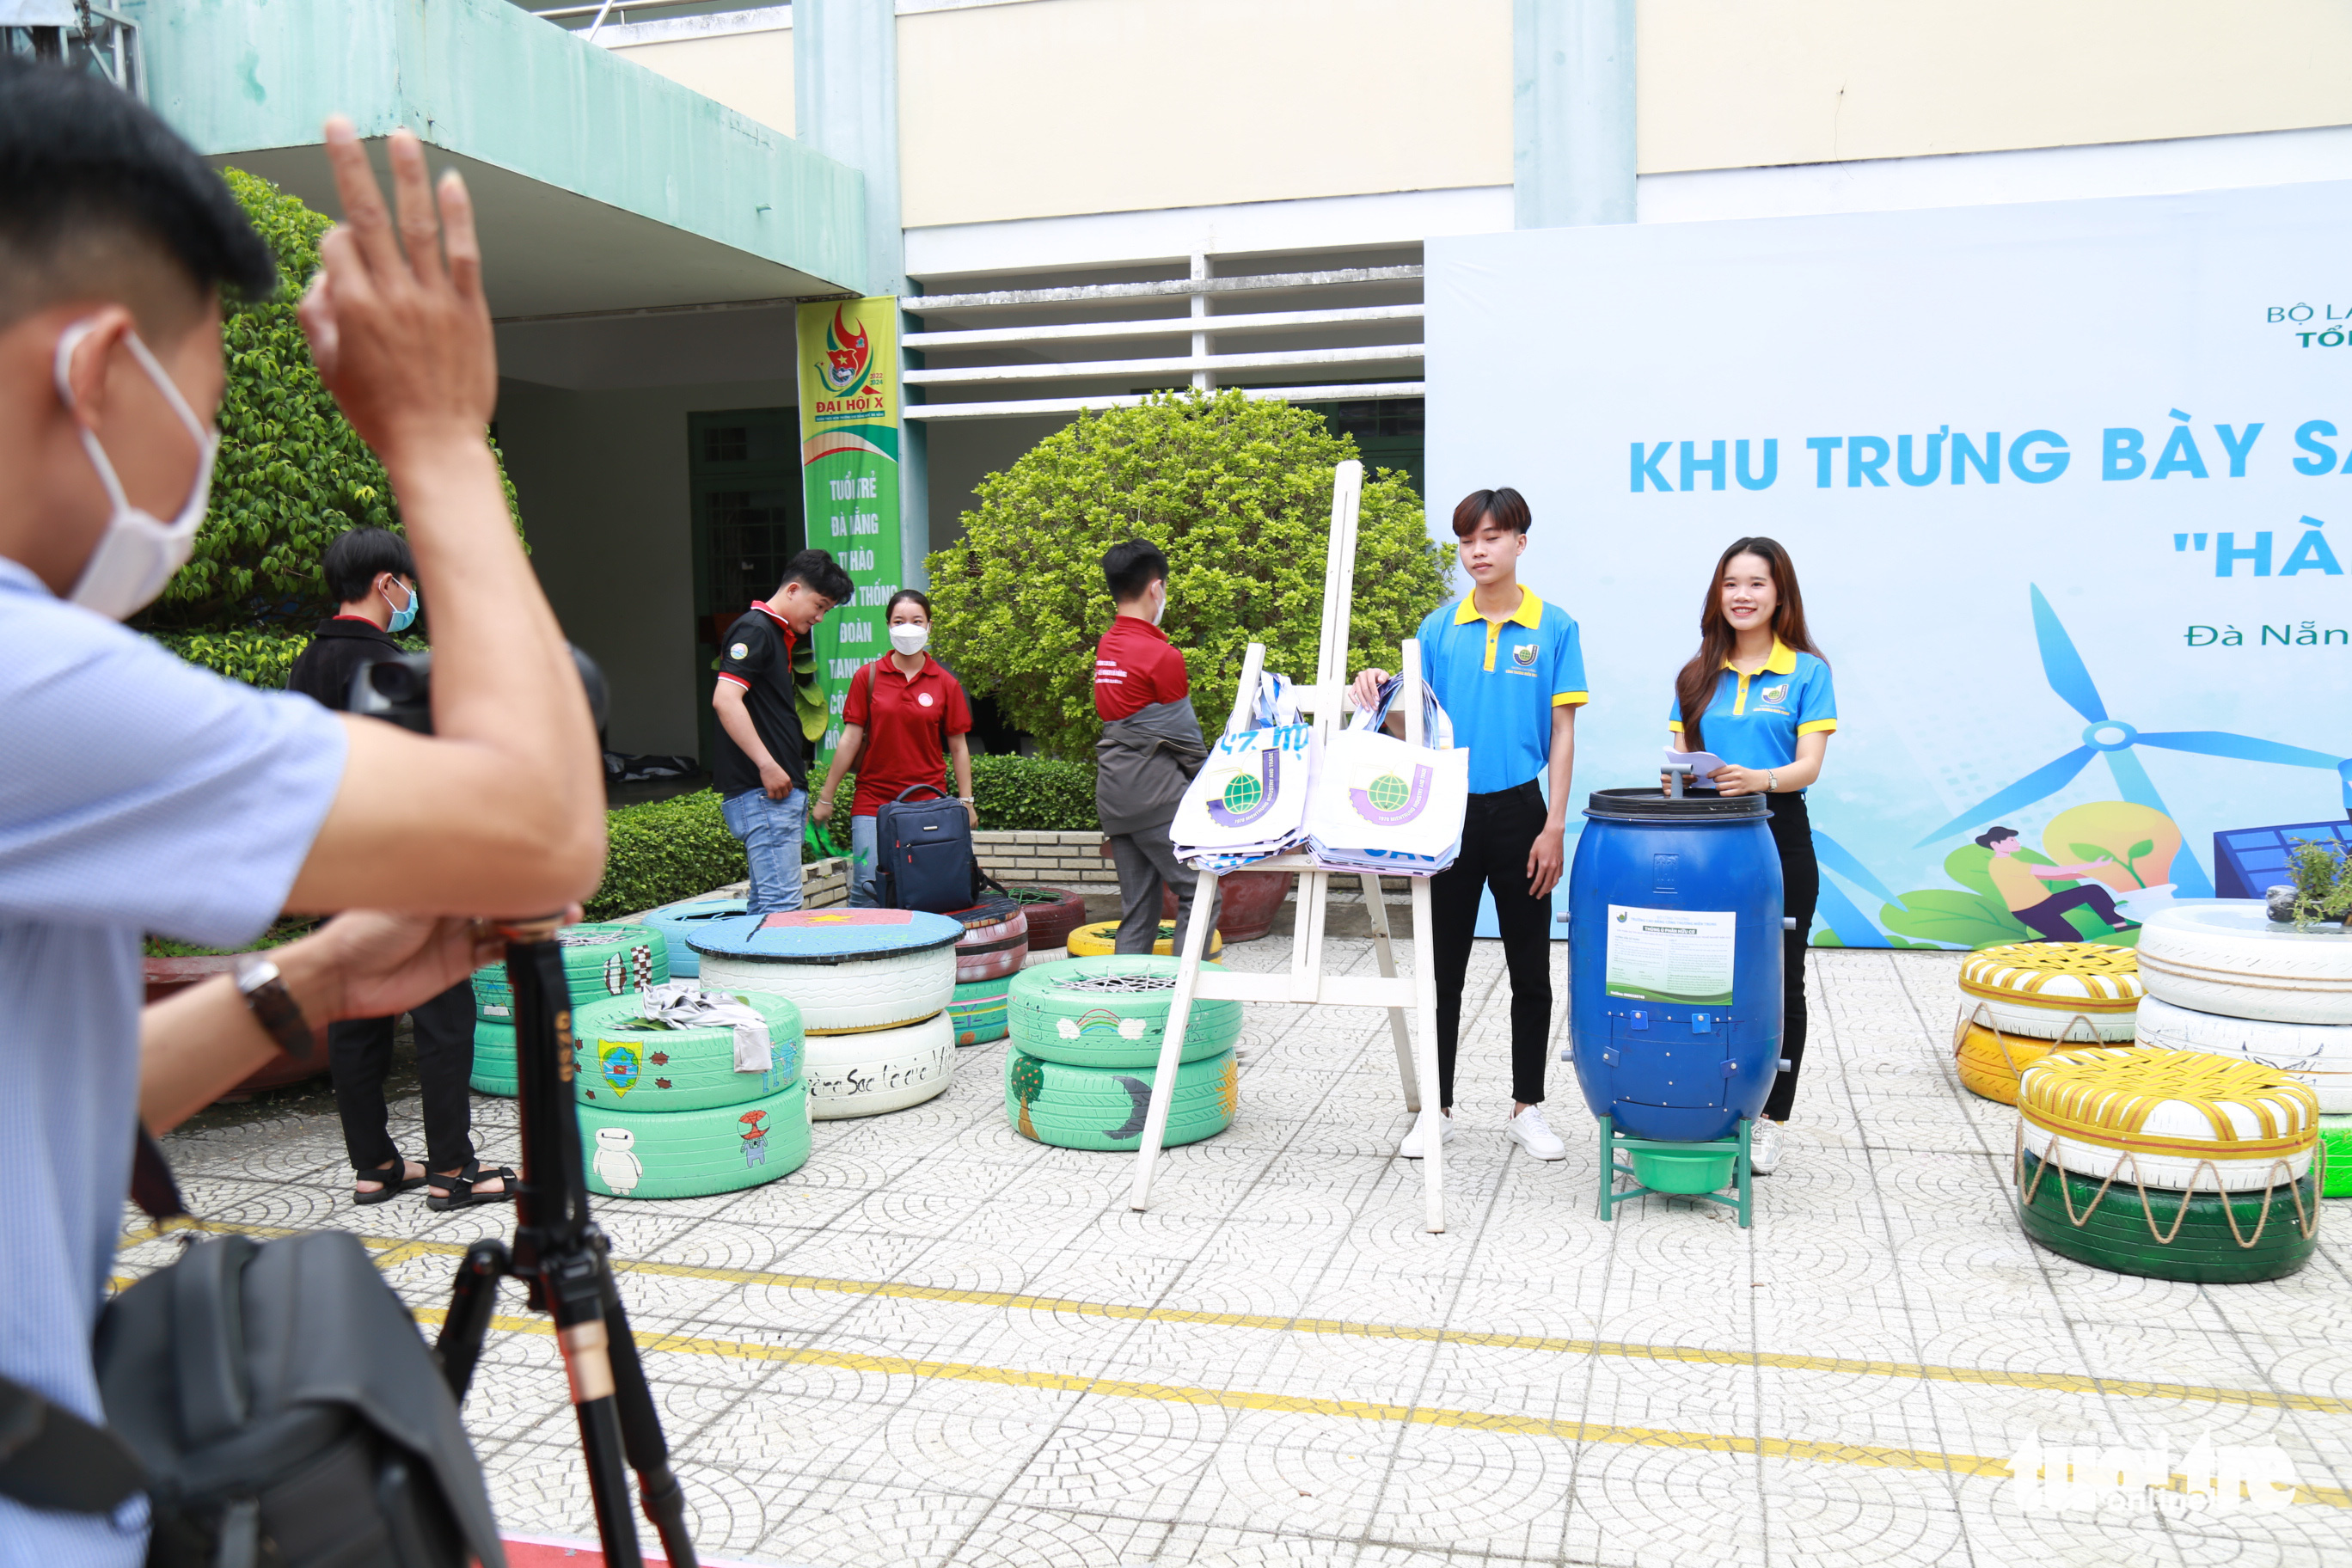 Products made from recyclable material are presented at the event in Da Nang City, July 2, 2022. Photo: Doan Nhan / Tuoi Tre